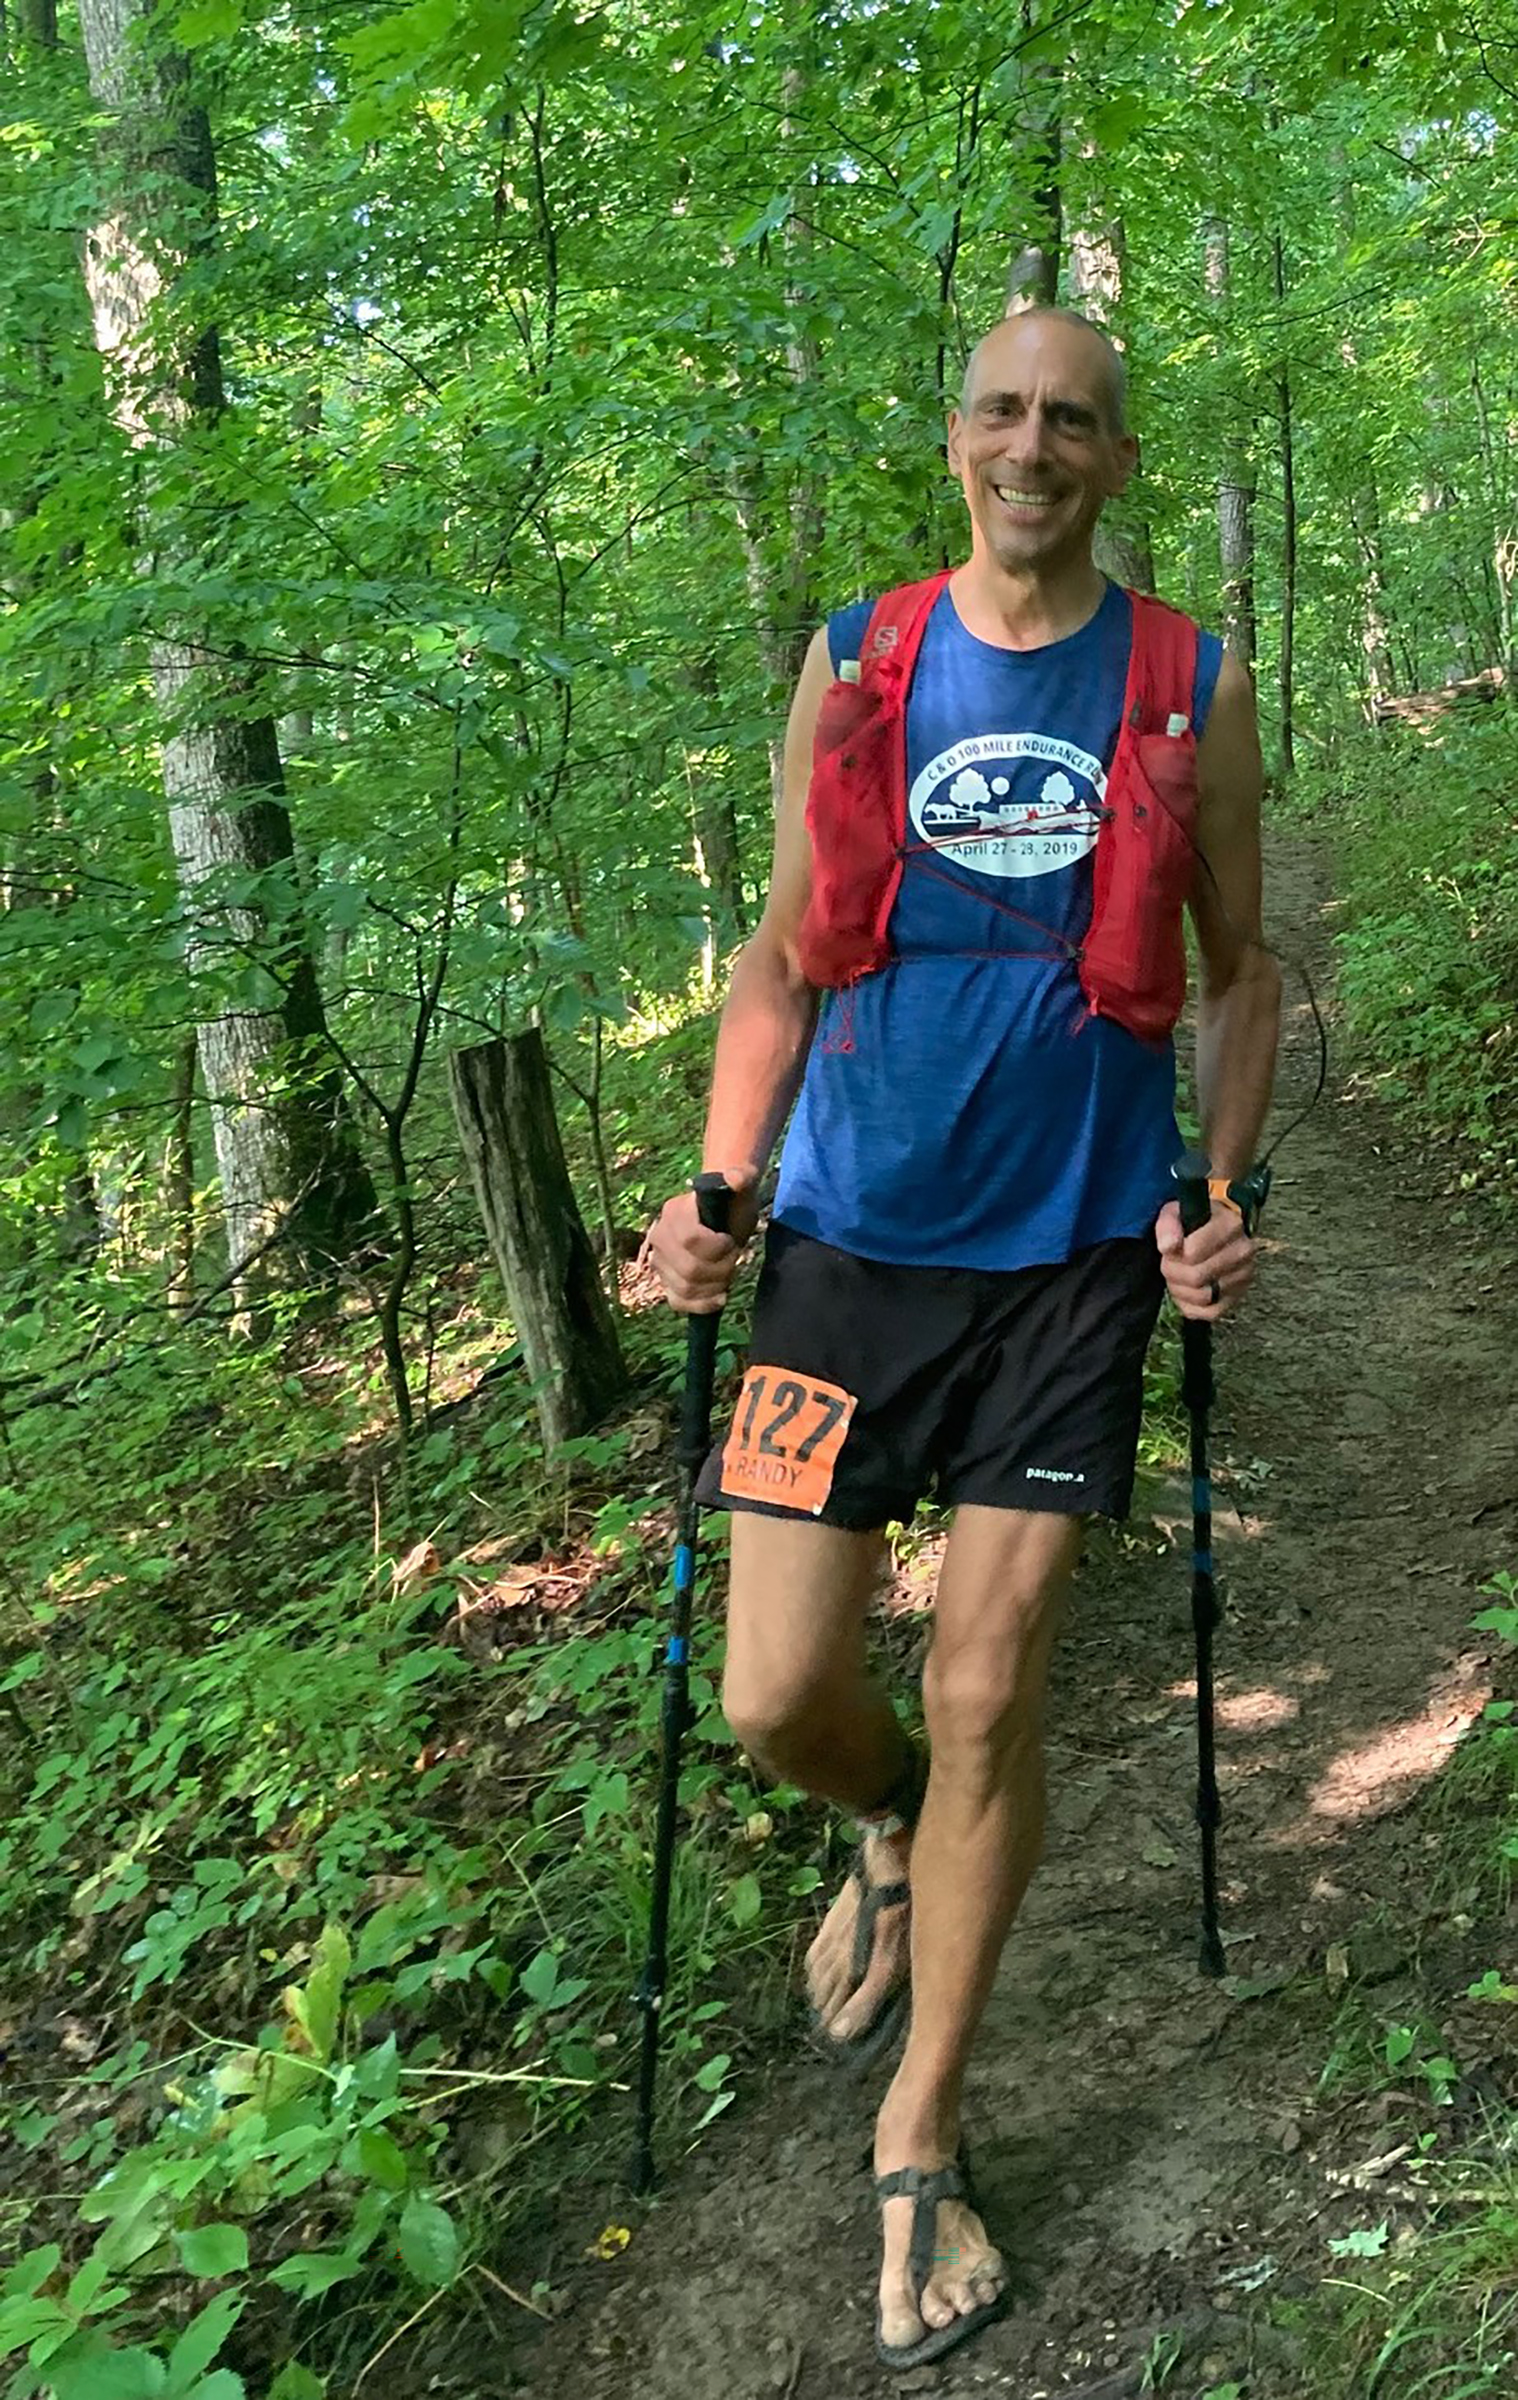 Randy Kreill regularly competes in races and in July, finished his 79th race. Most are between 50 and 100 miles long and he runs these races wearing only sandals. CONTRIBUTED